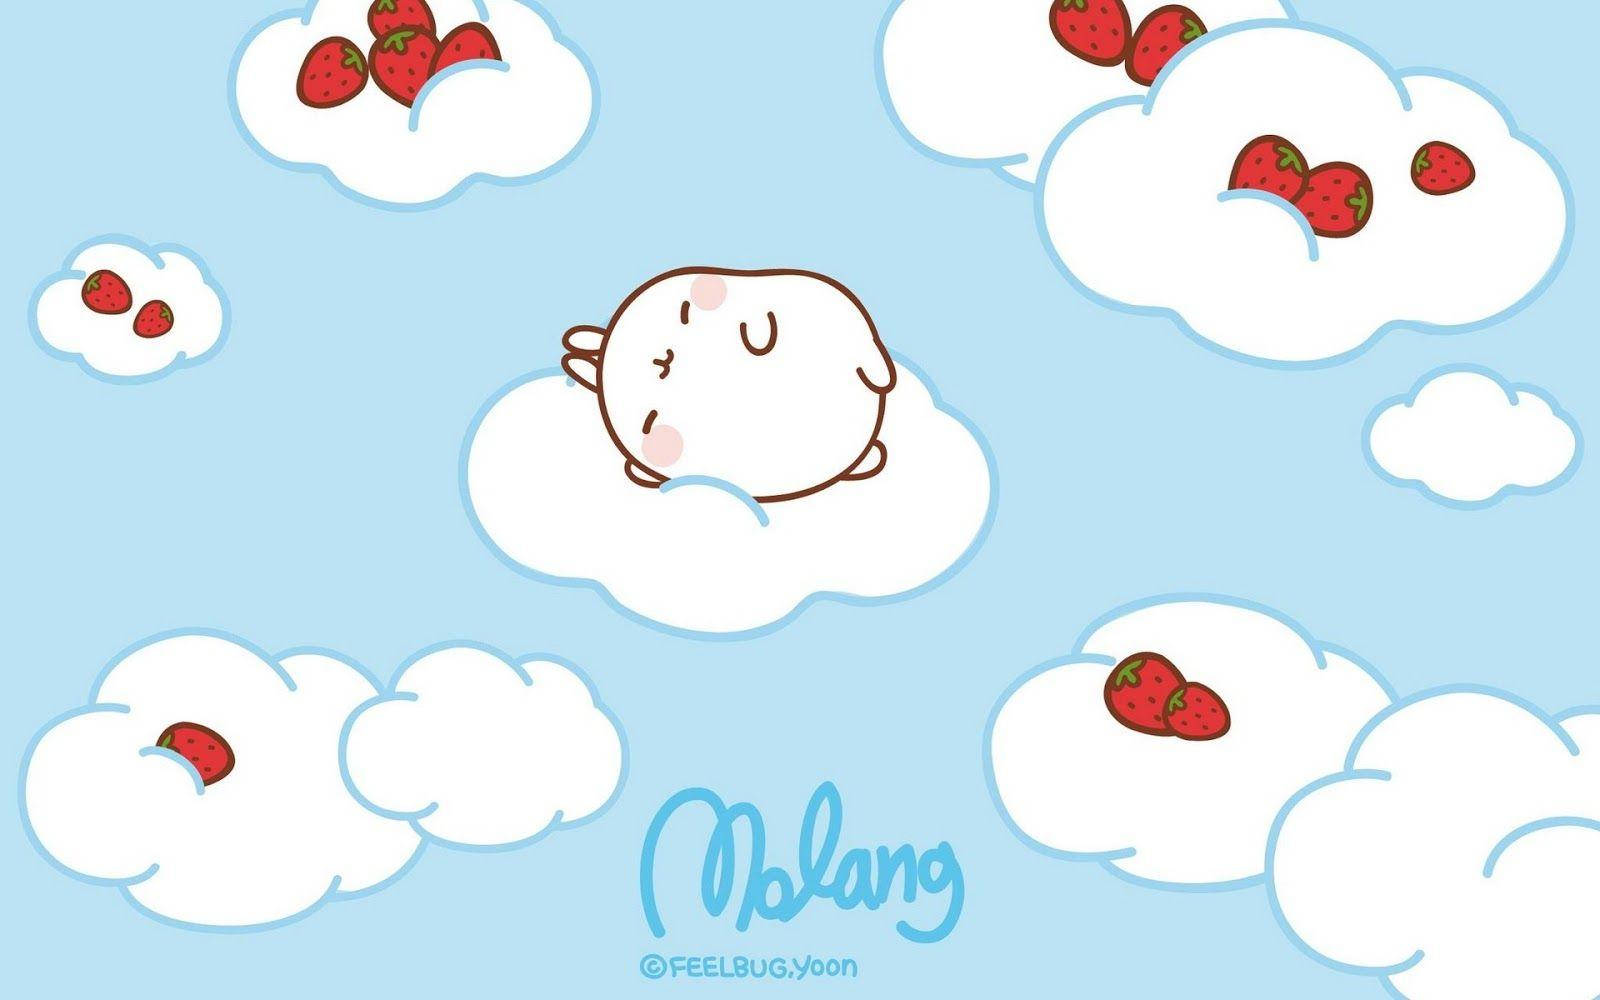 molang background